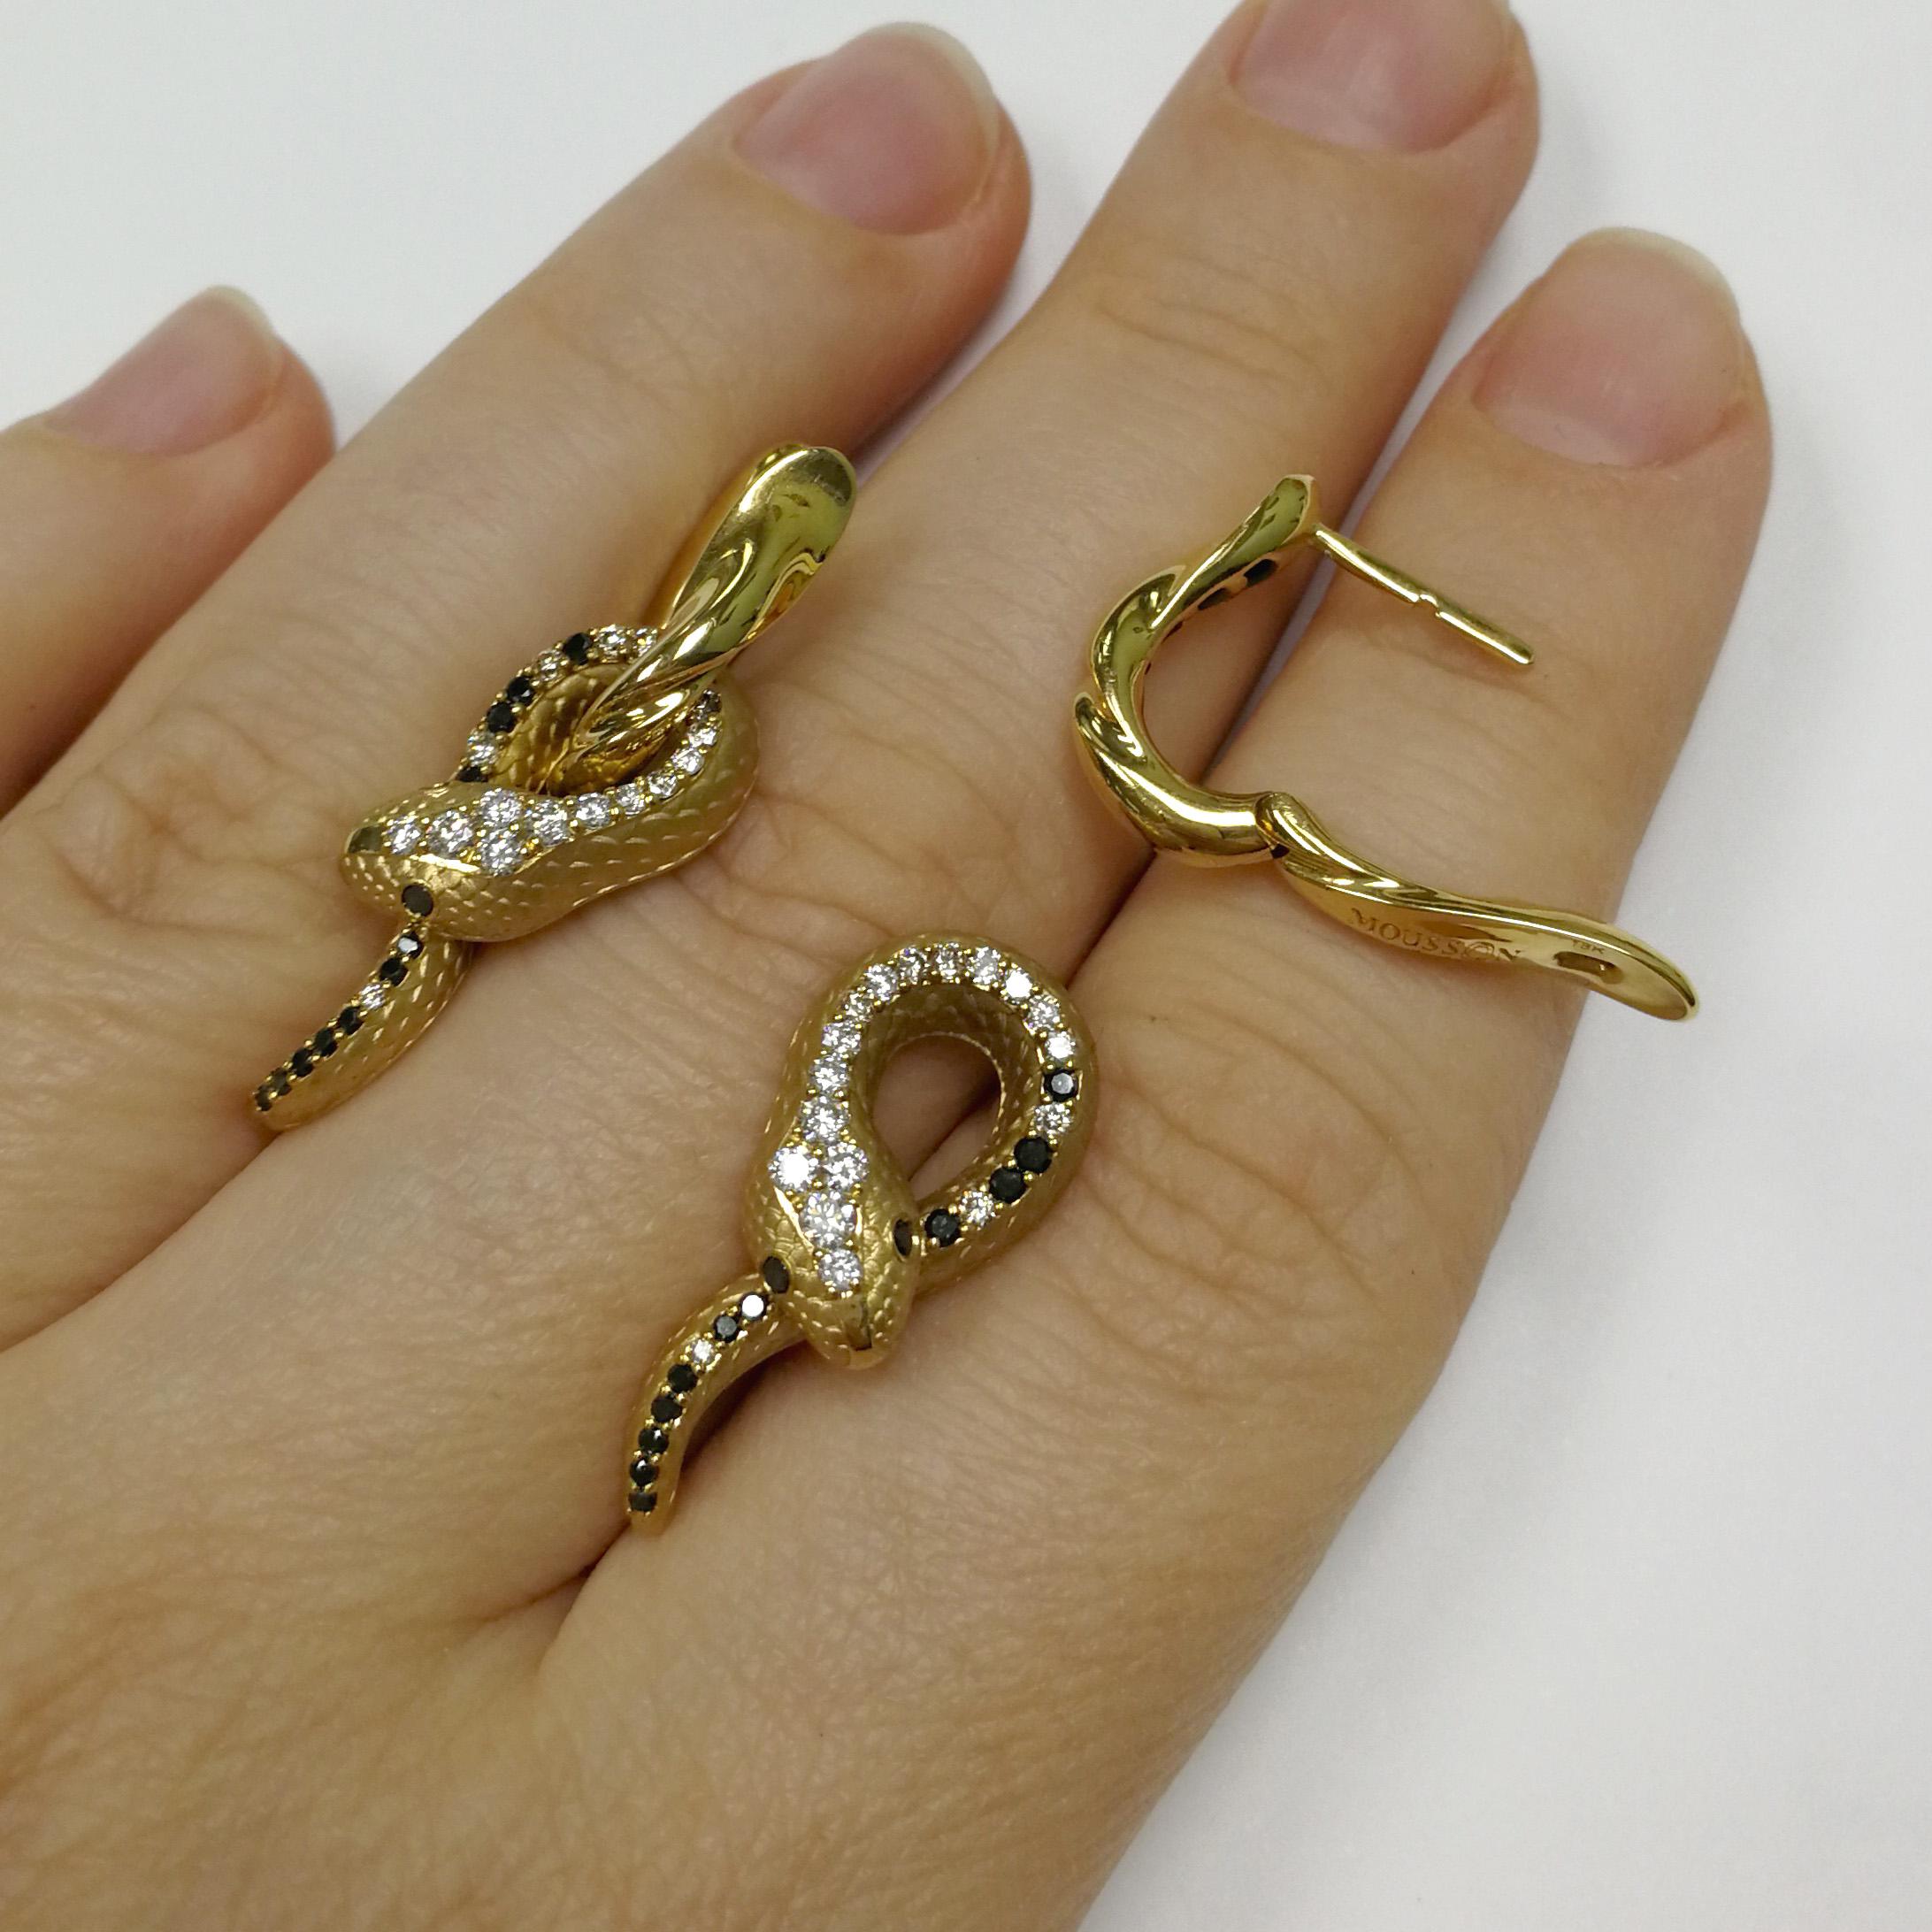 White, Champagne and Black Diamonds 18 Karat Yellow Gold Snake Earrings For Sale 2